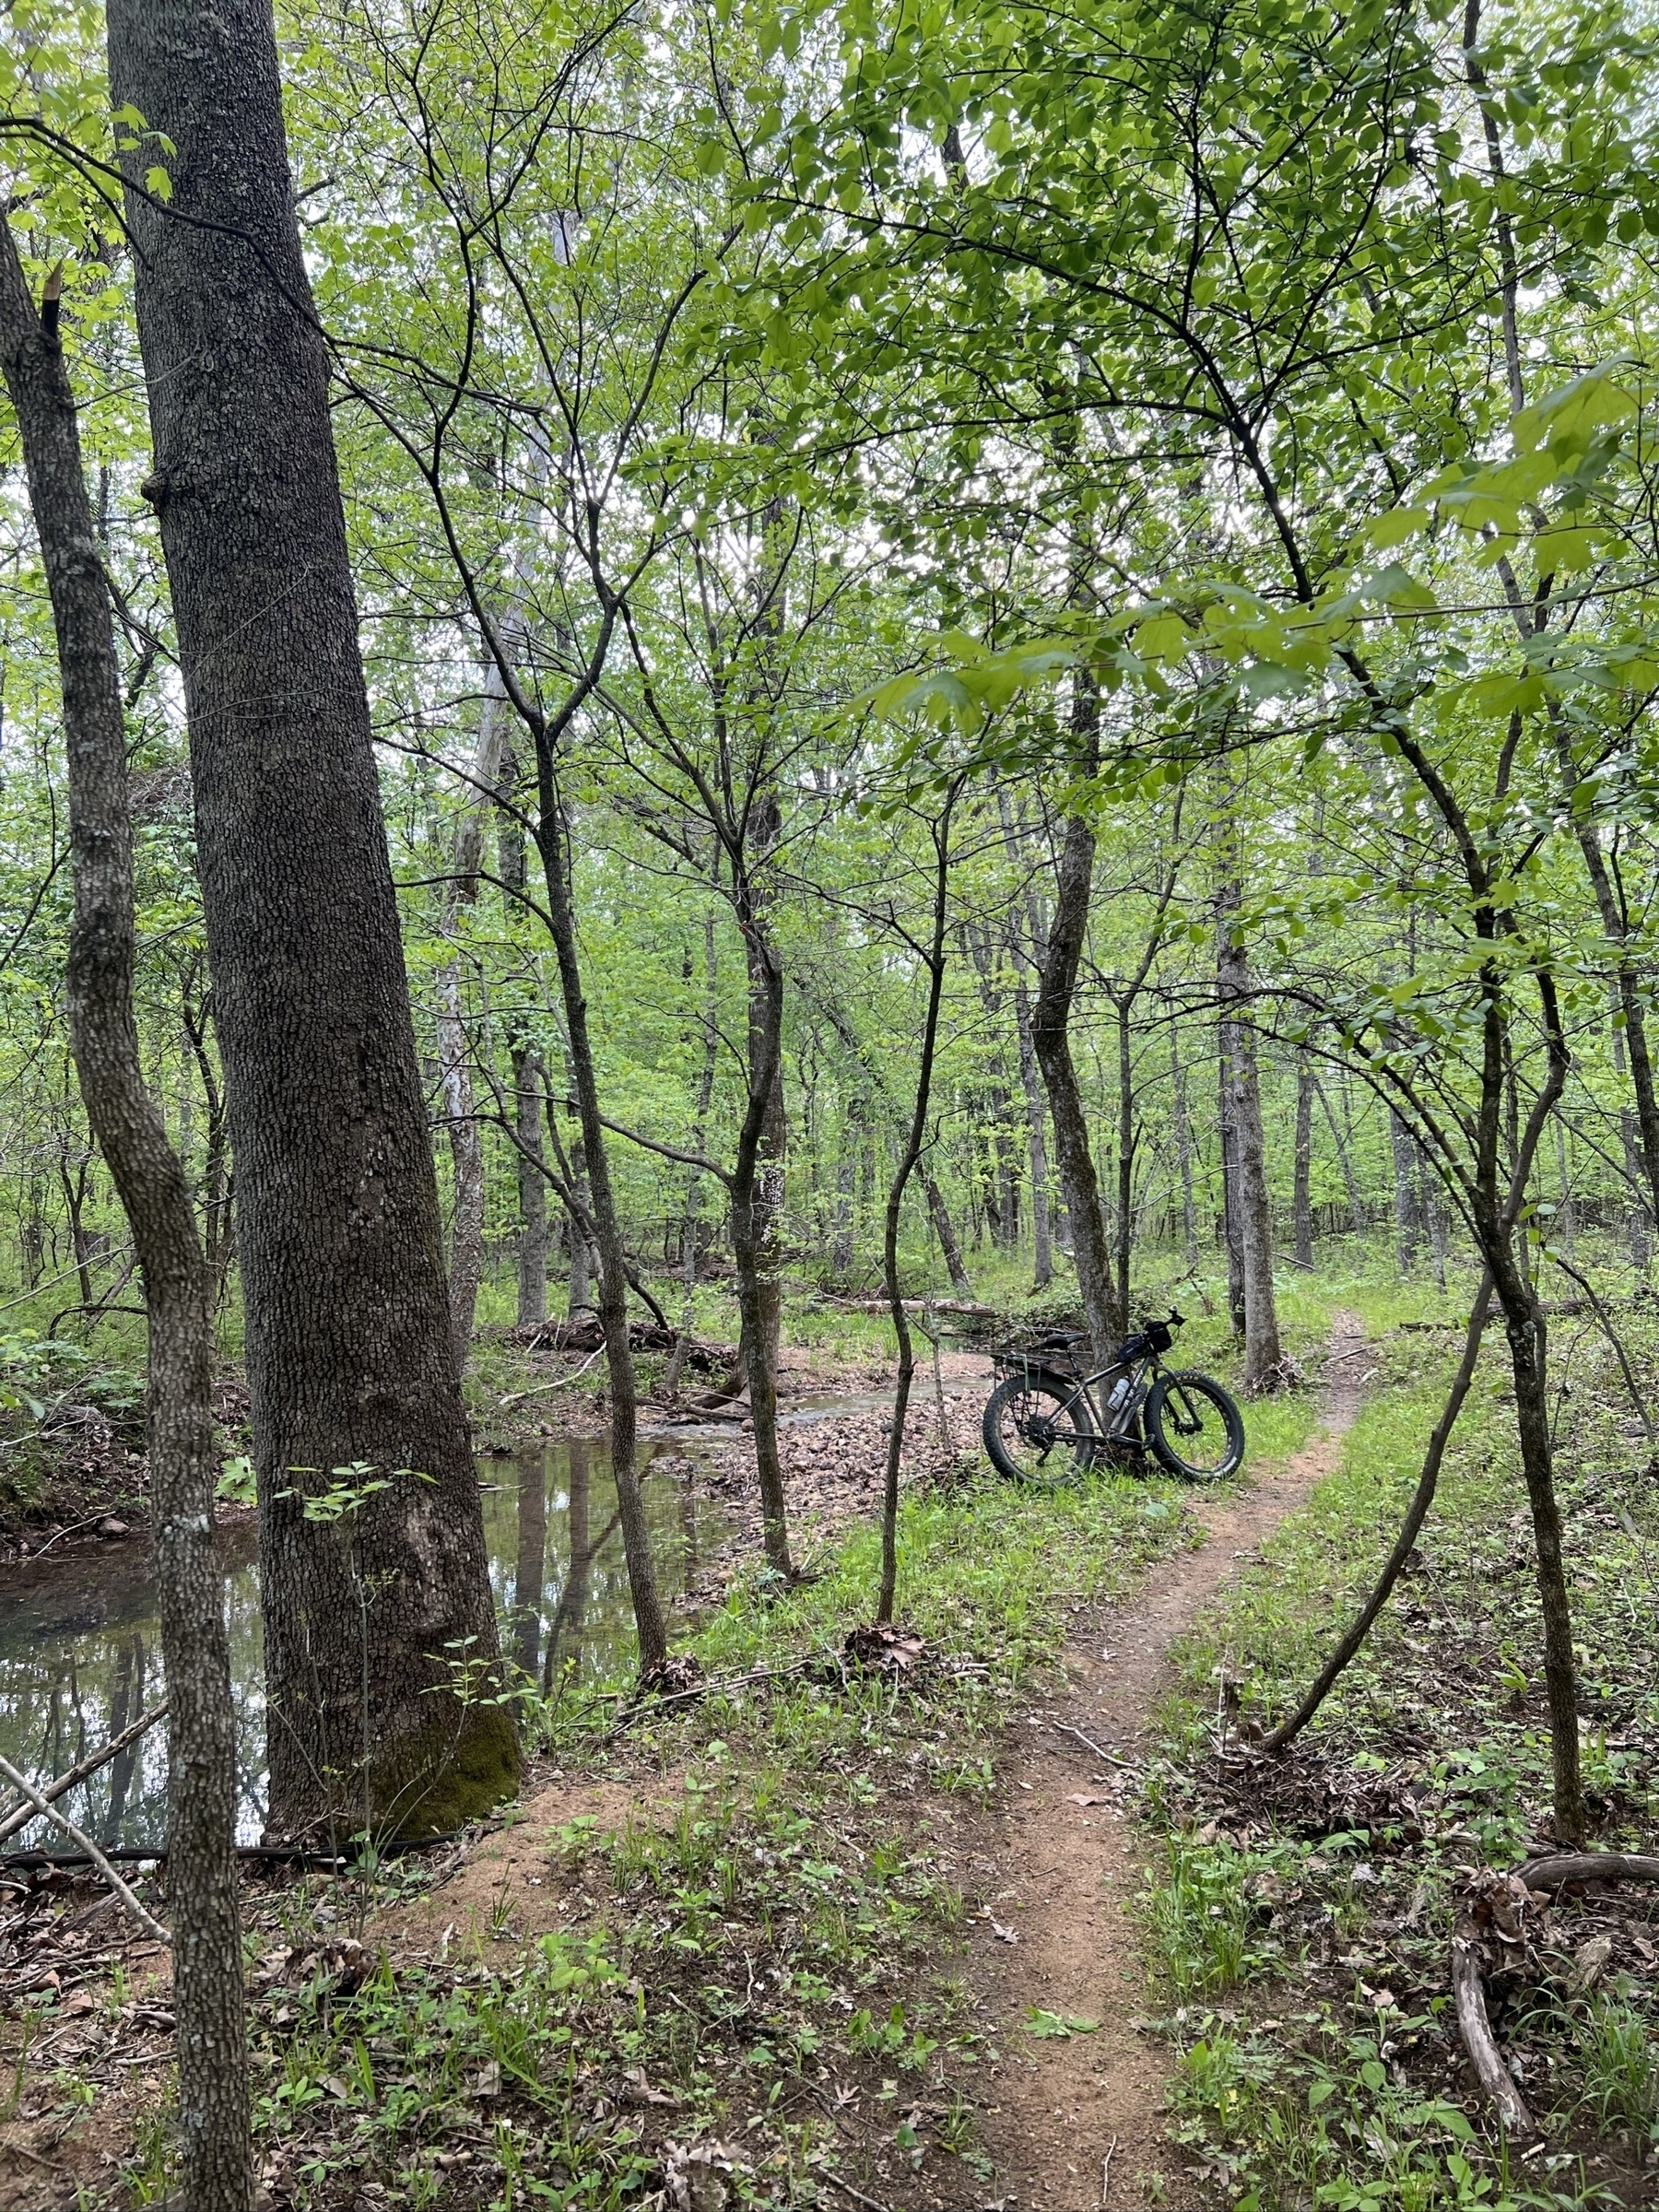 A fat tire bike leans against a tree between a creek and a trail through the woods.